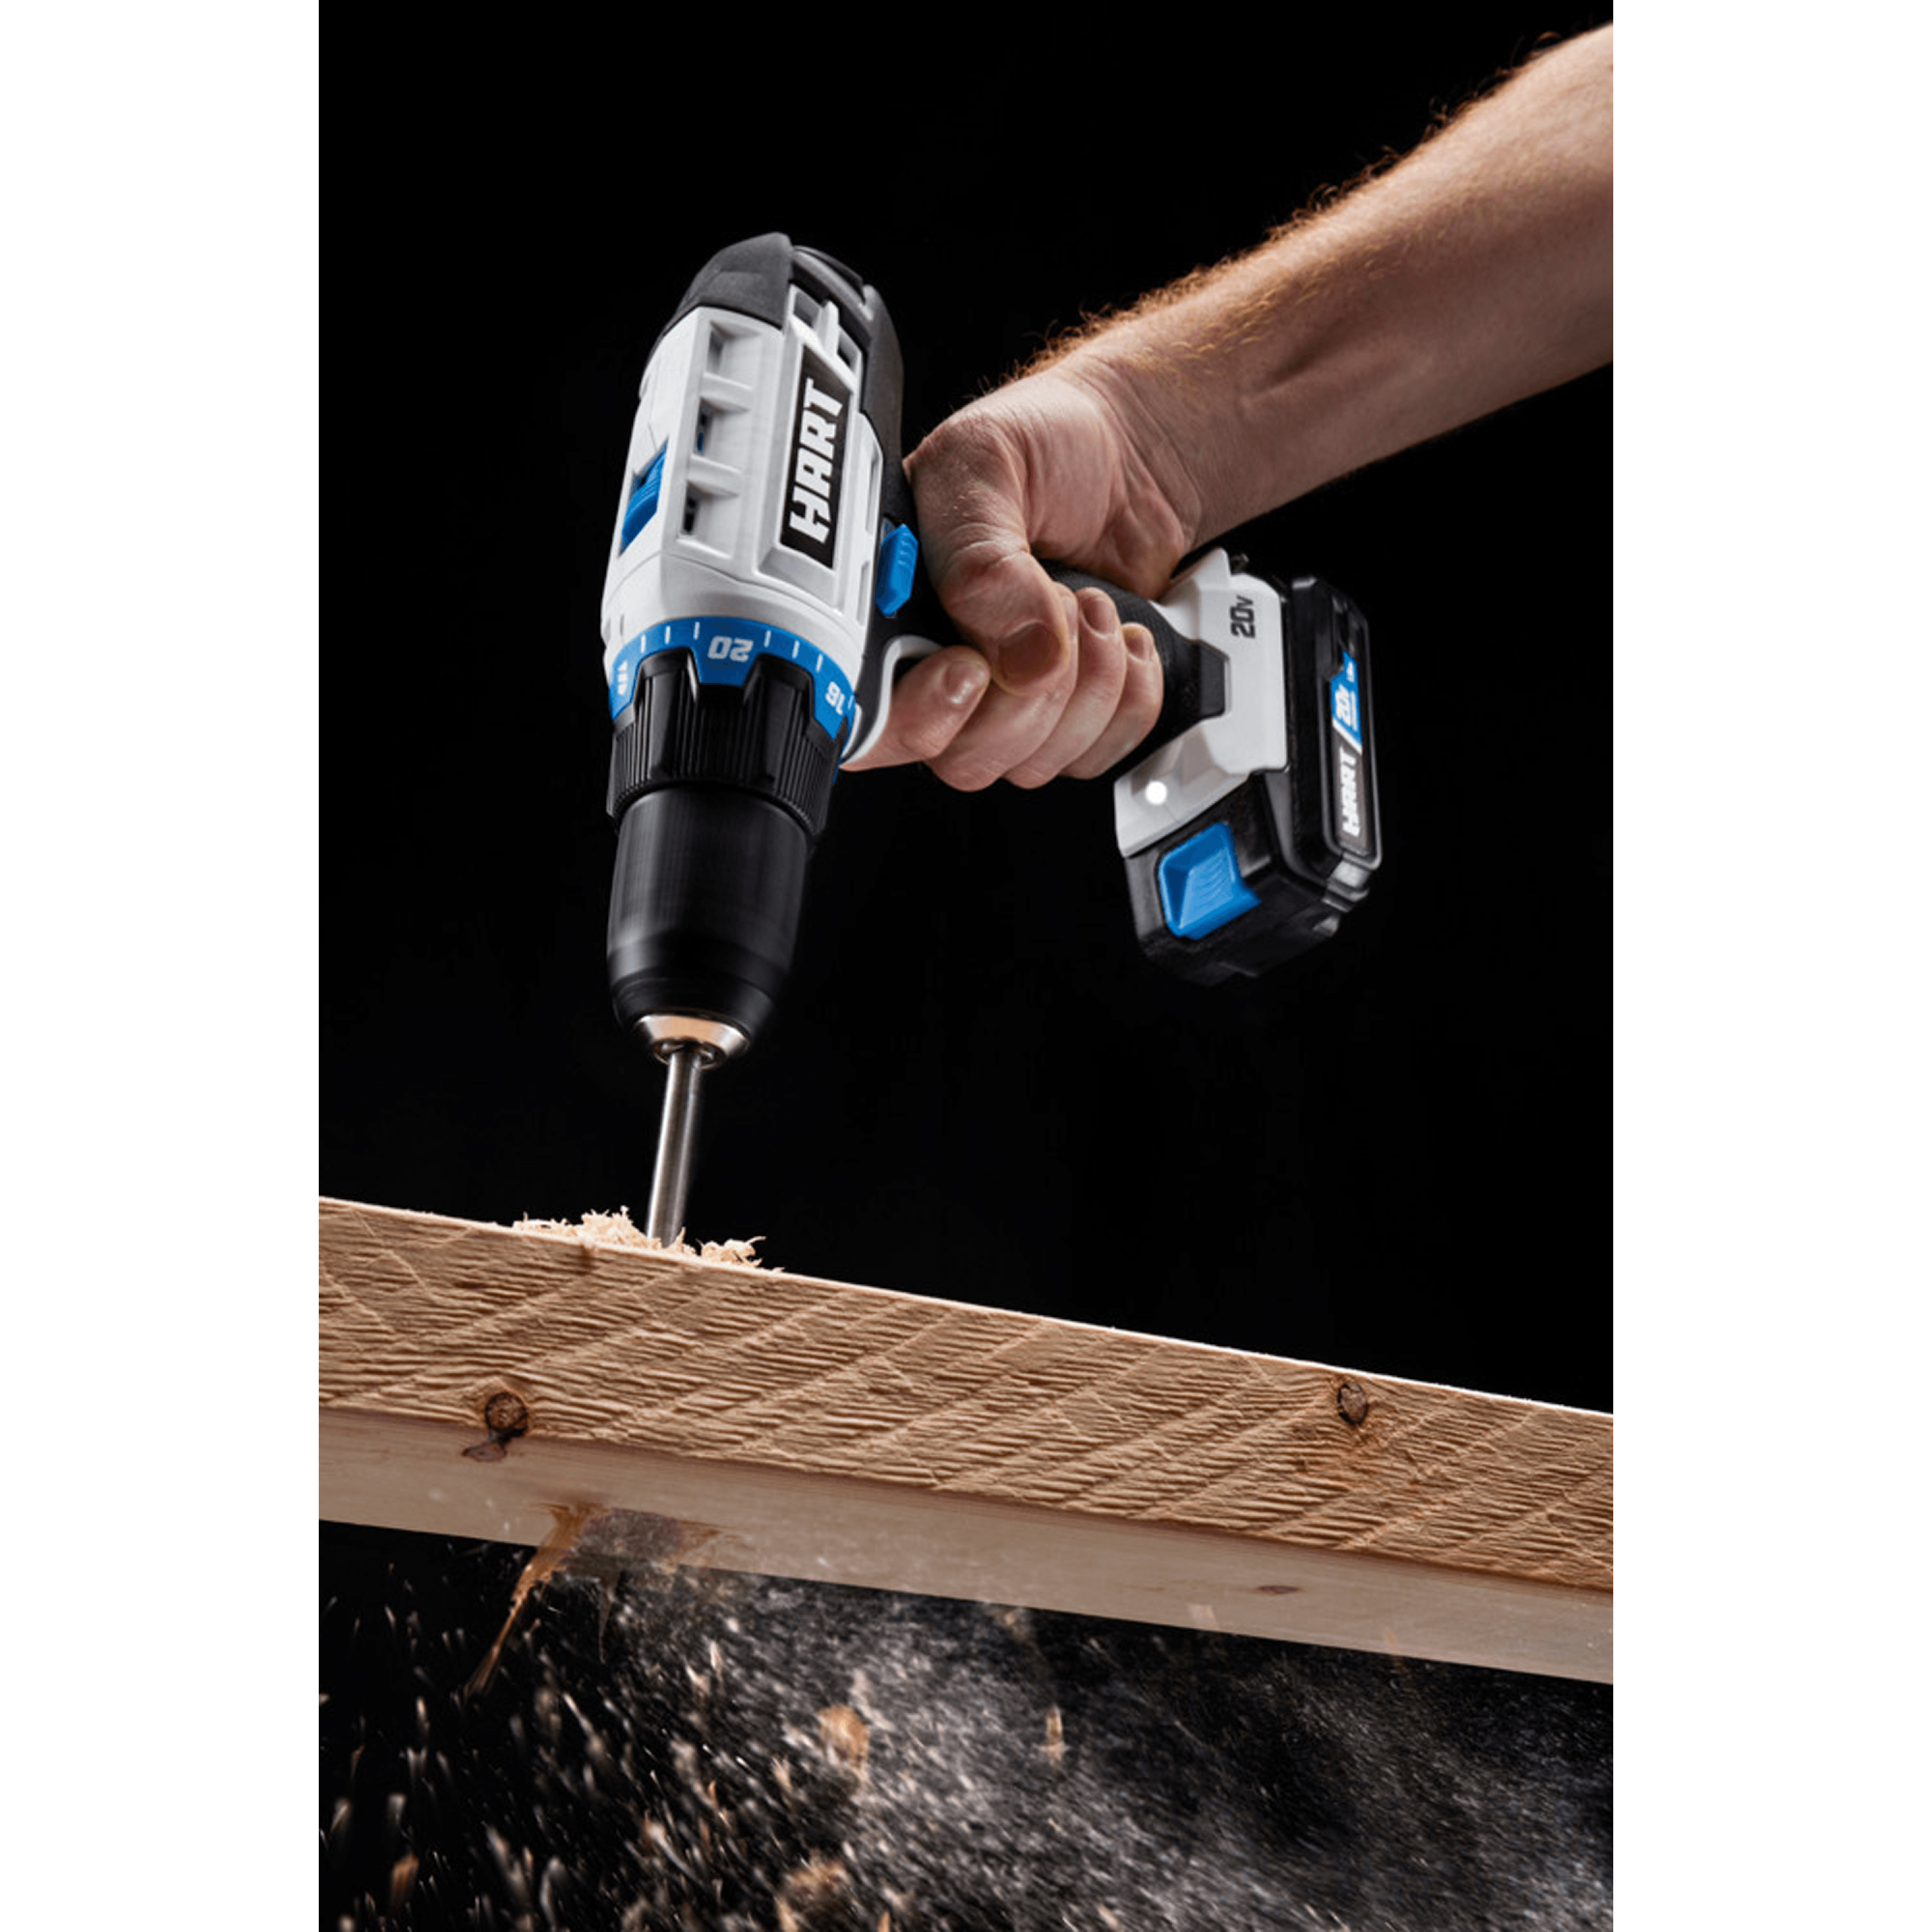 HART 20-Volt Cordless 1/2-inch Drill/Driver Kit (1) 1.5Ah Lithium-Ion Battery - image 10 of 17